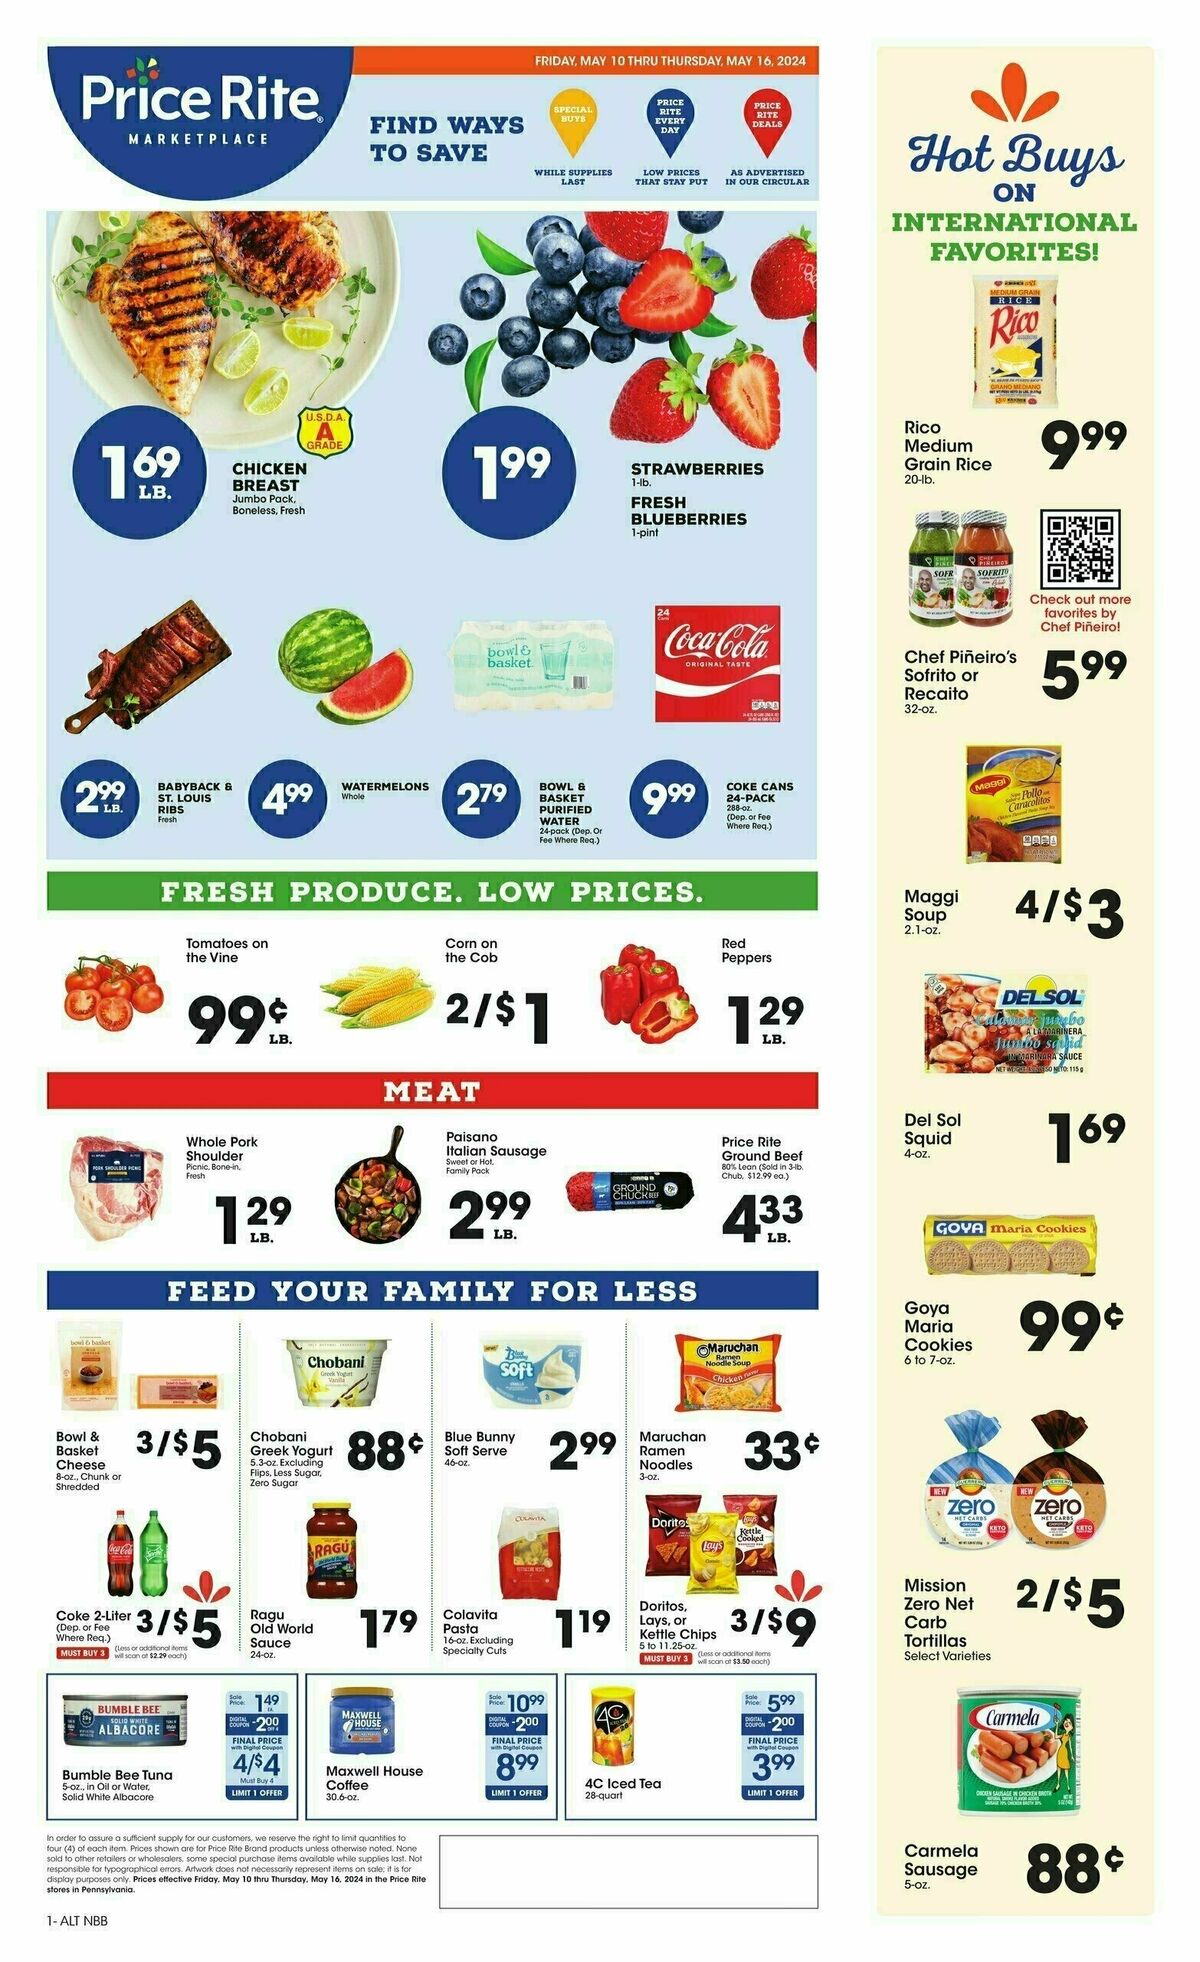 Price Rite Weekly Ad from May 10